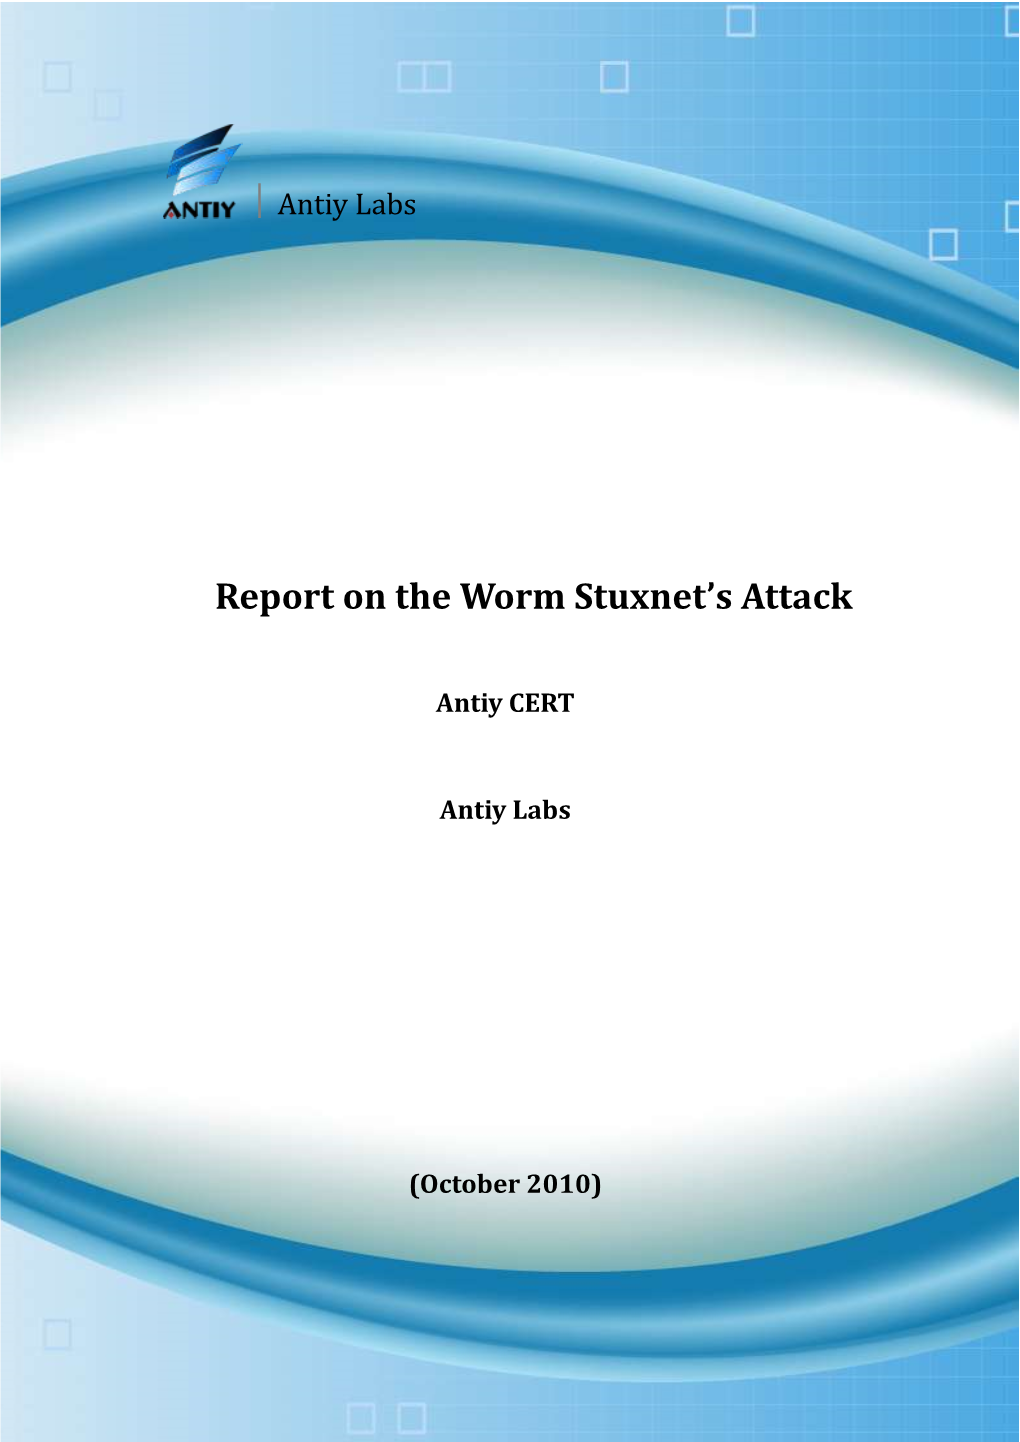 Report on the Worm Stuxnet's Attack